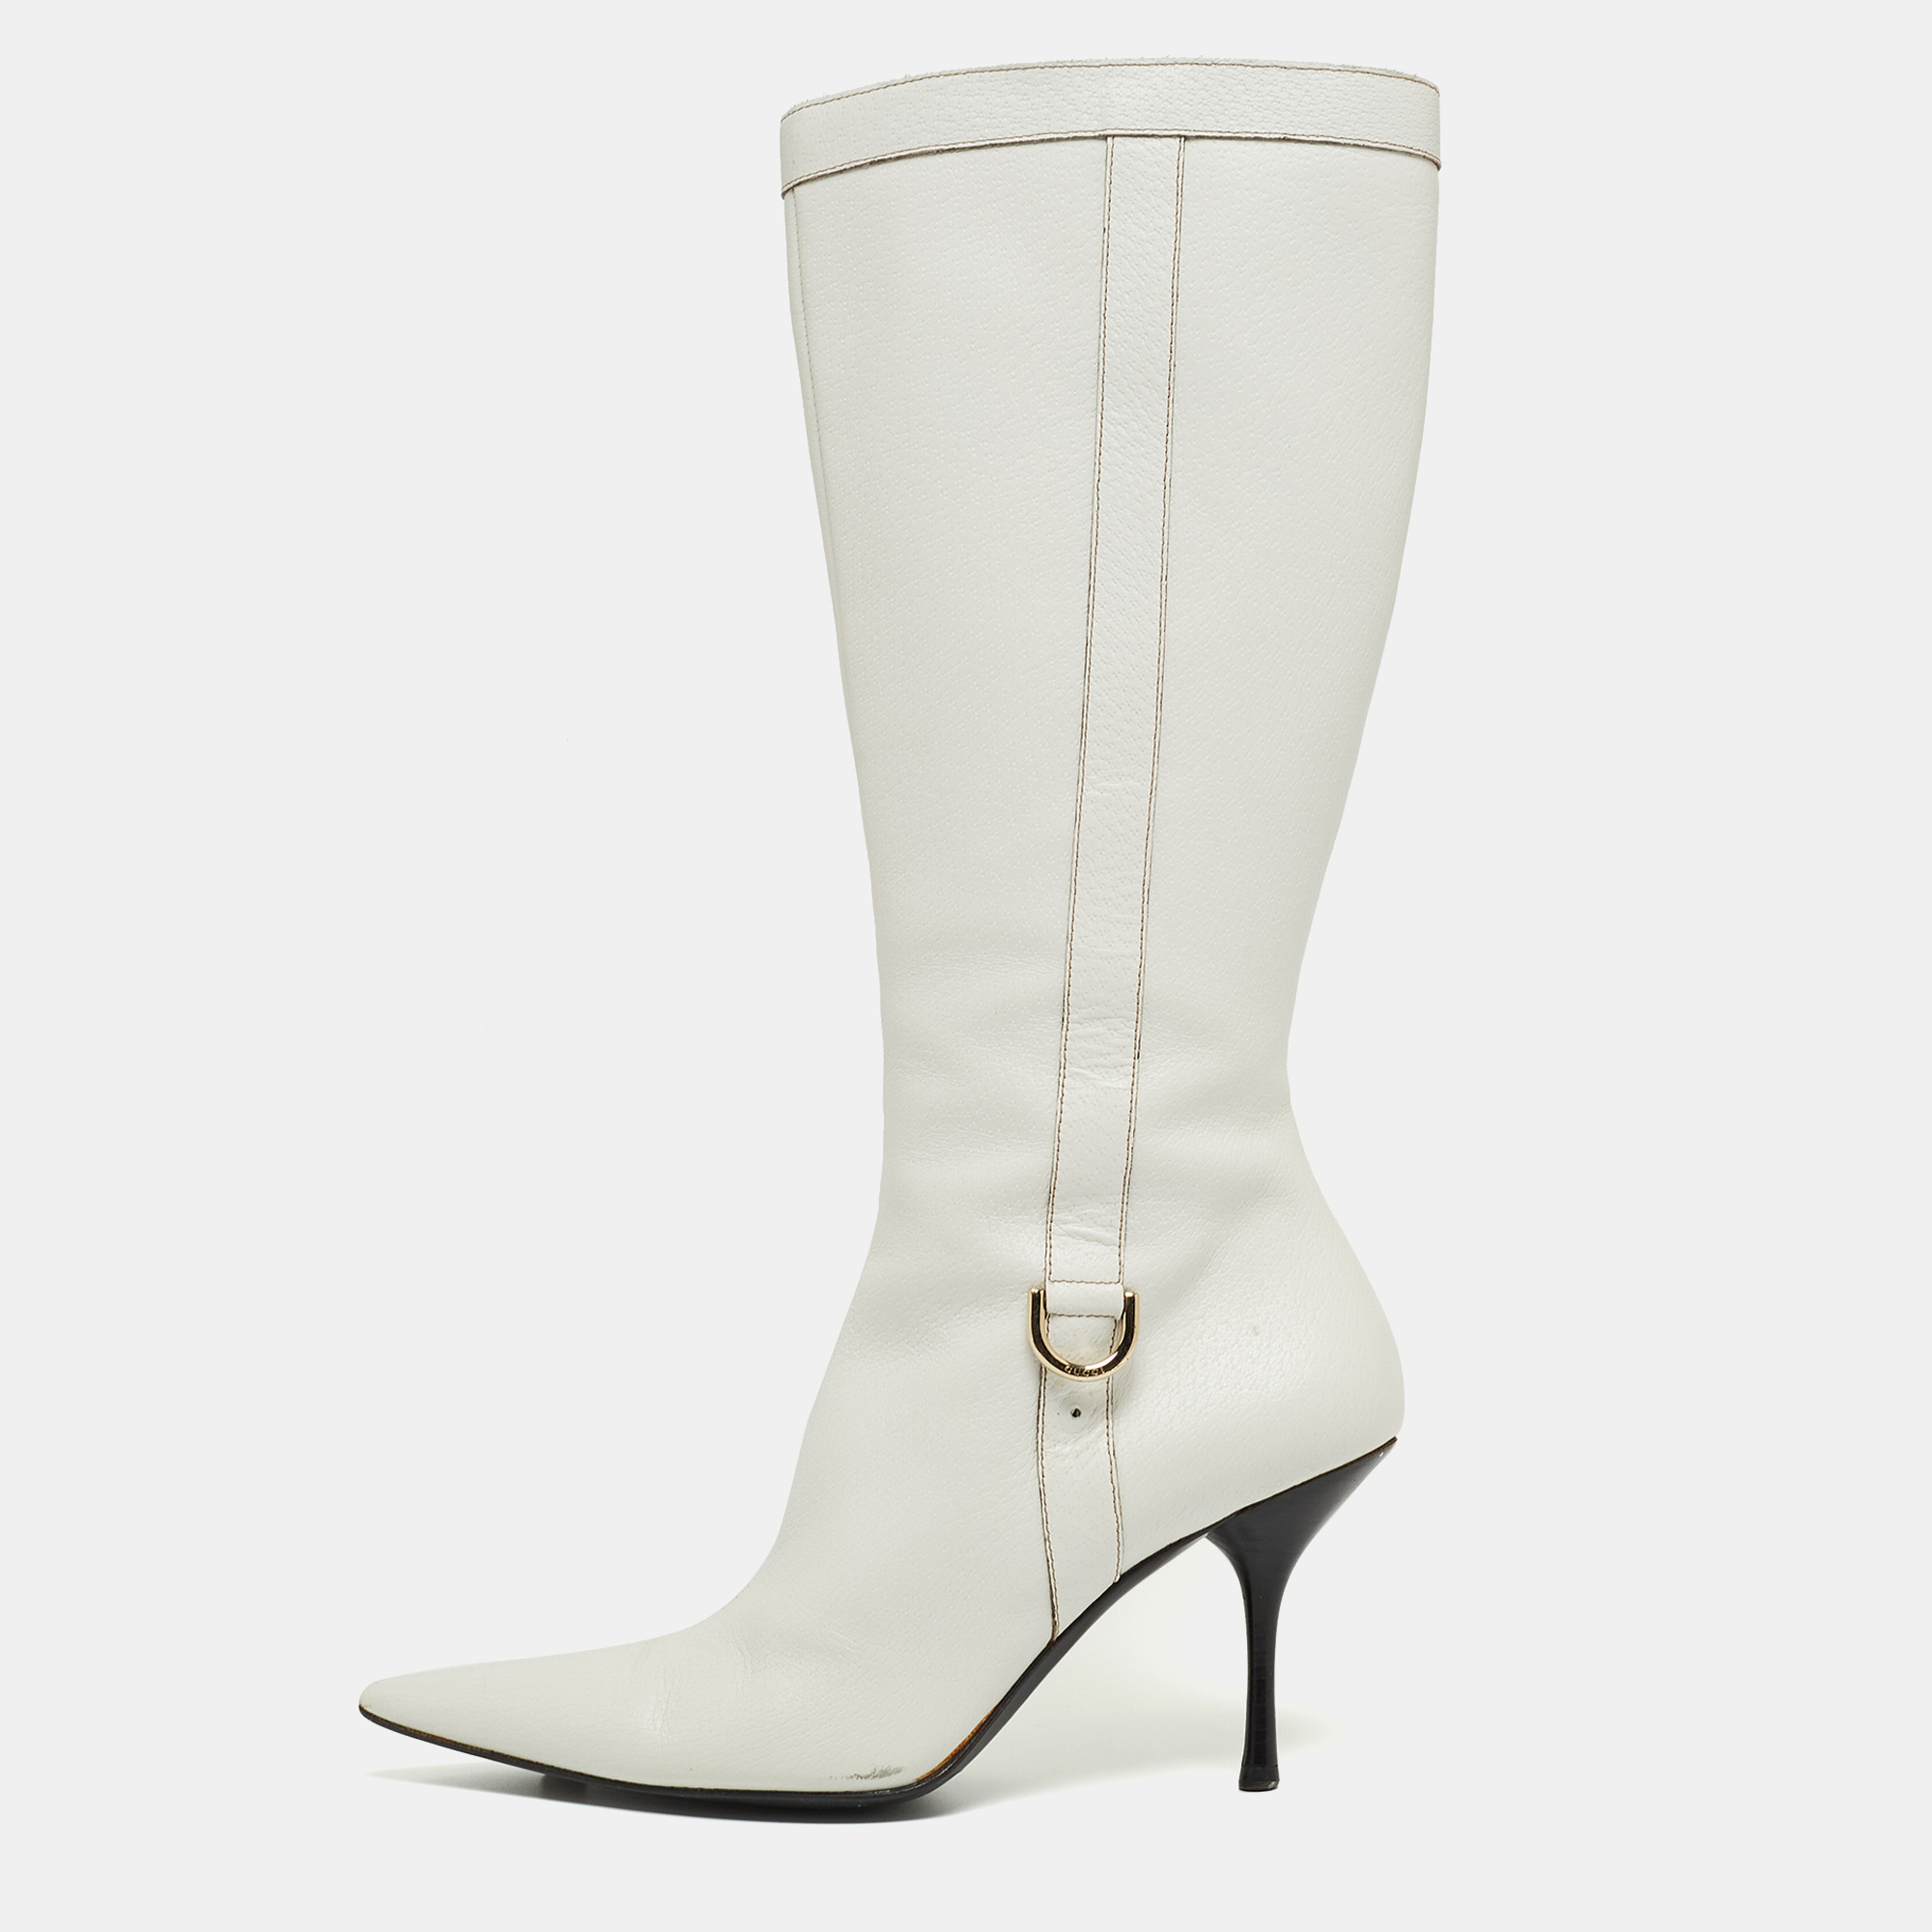 Gucci white leather pointed toe knee length boots size 41